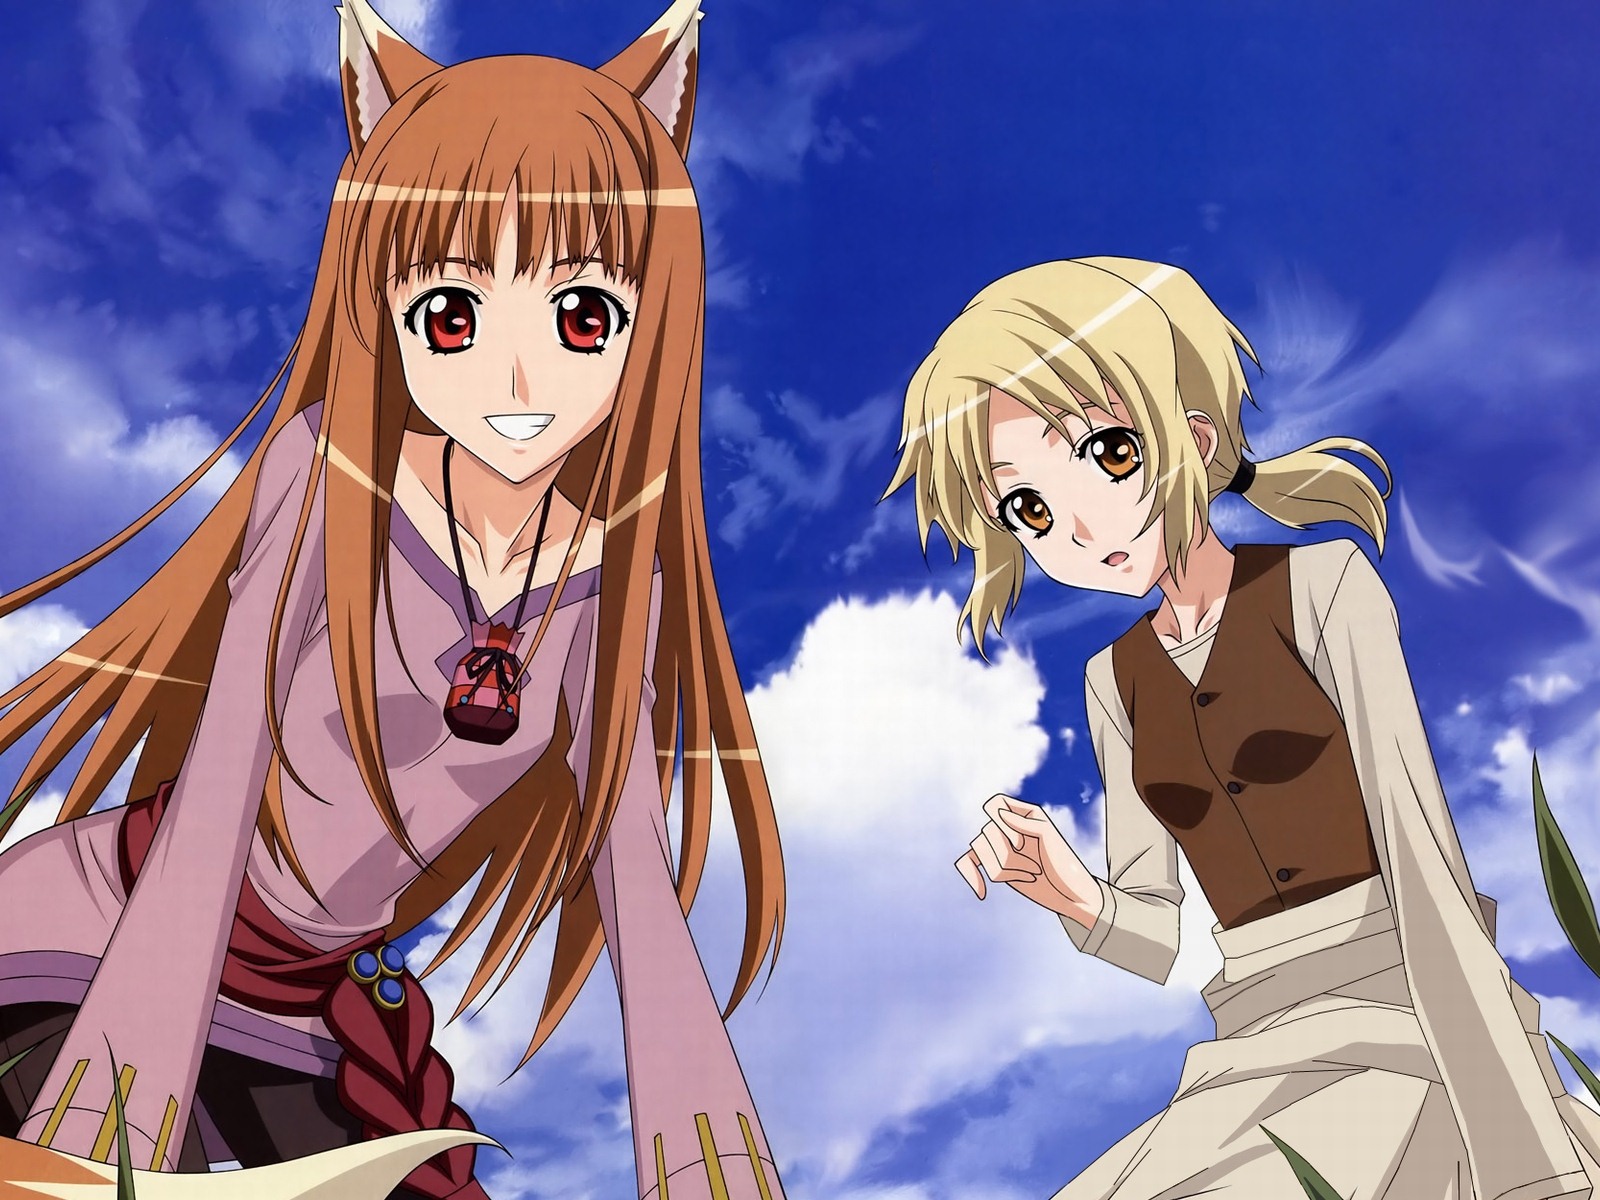 Spice and Wolf HD Wallpaper #17 - 1600x1200